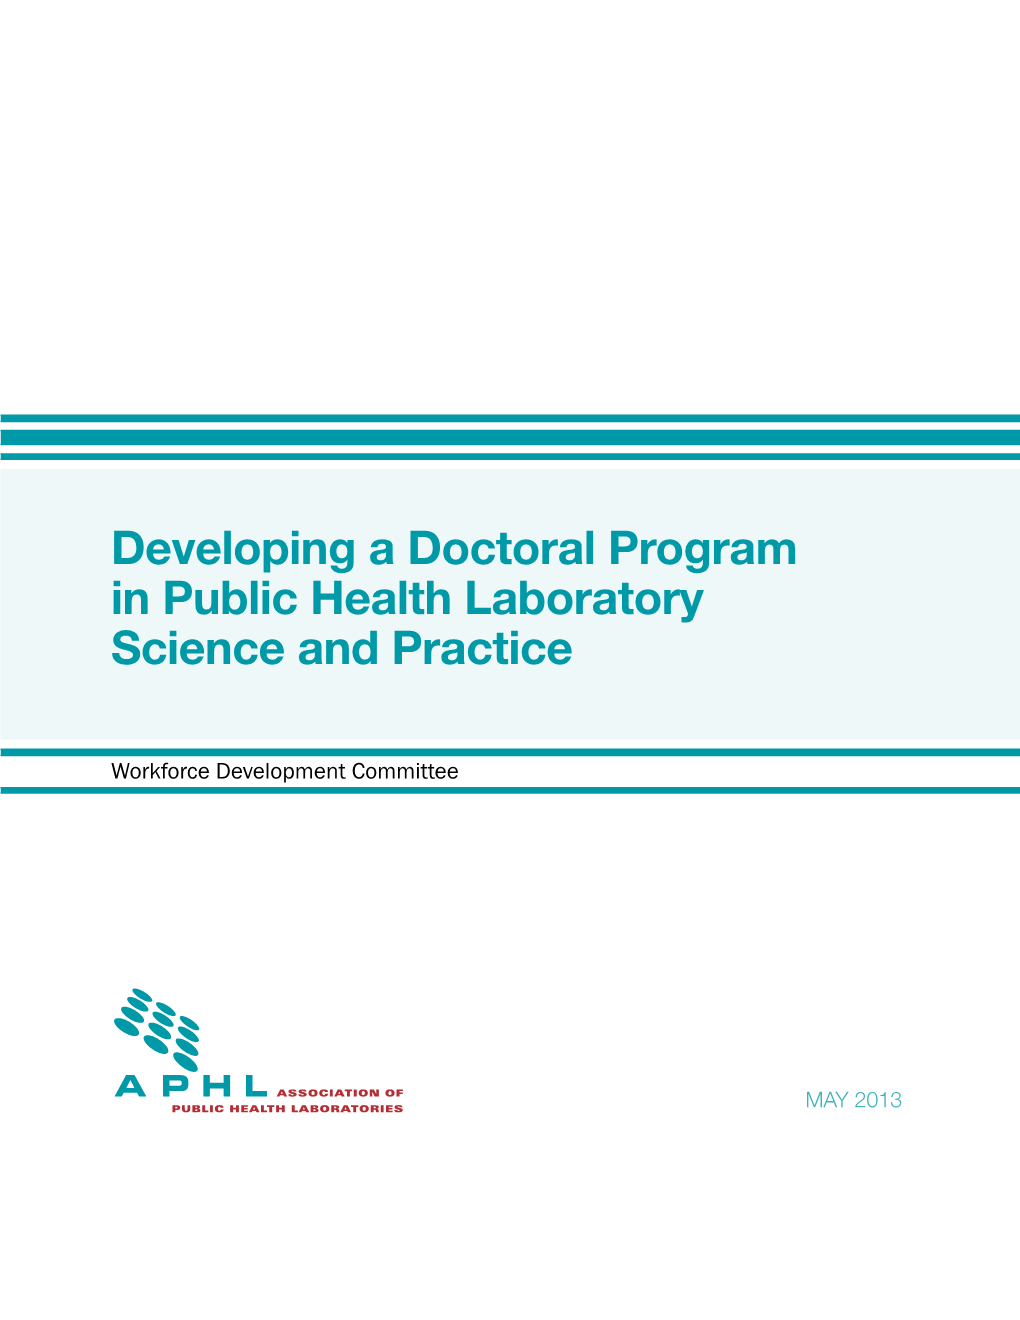 Developing a Doctoral Program in Public Health Laboratory Science and Practice